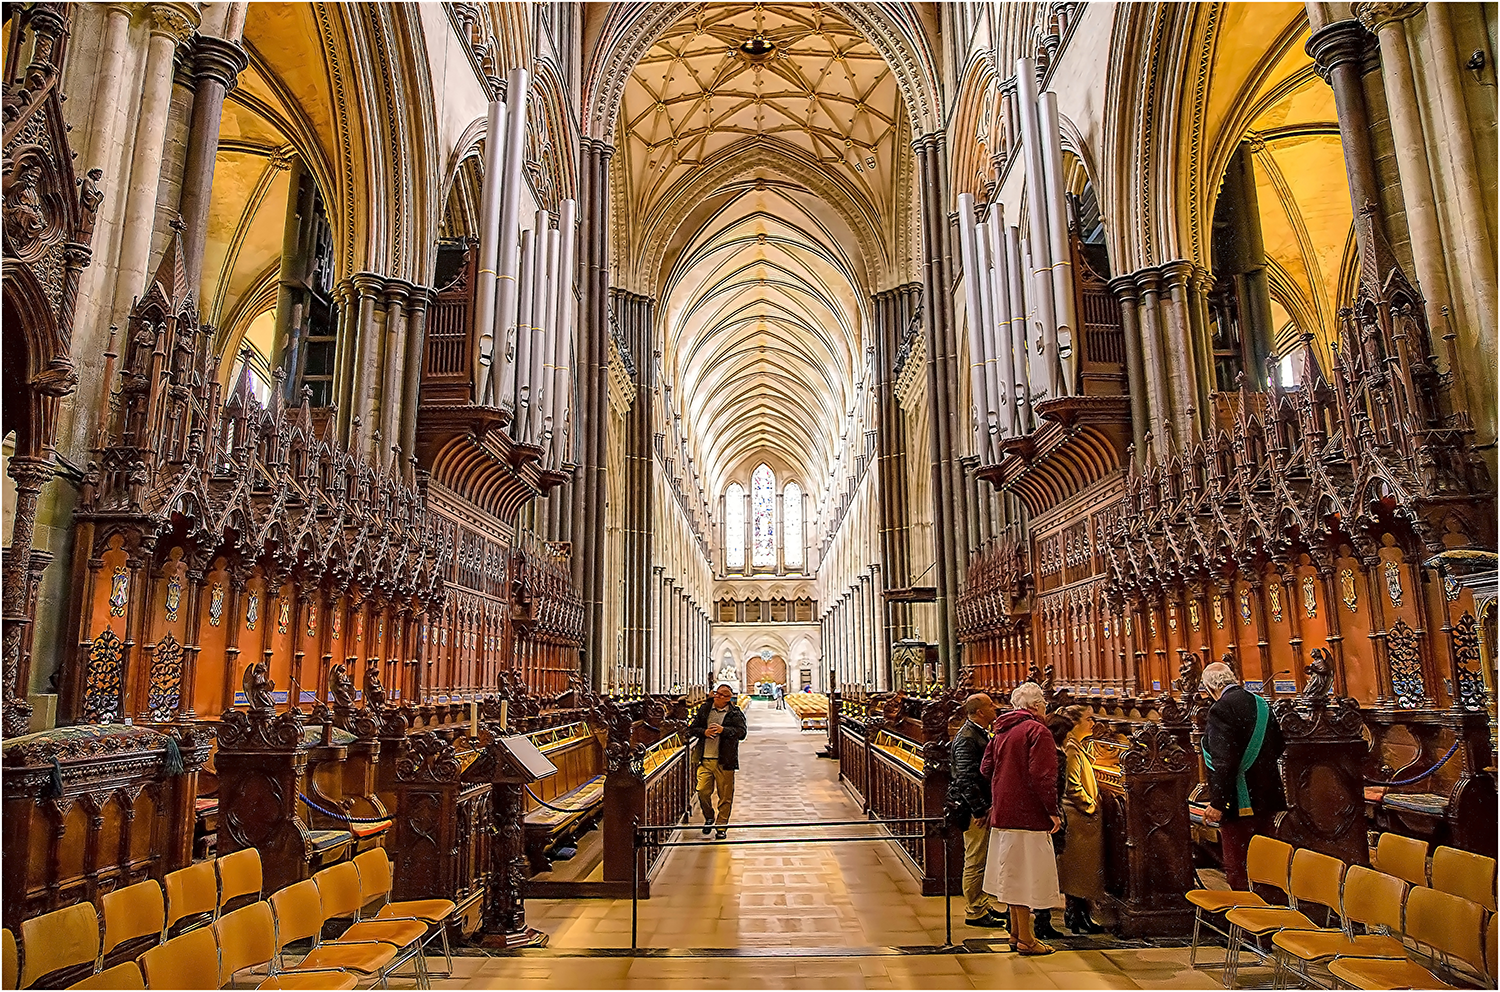 Interior photo of the choir stalls at Salisbury Cathedral